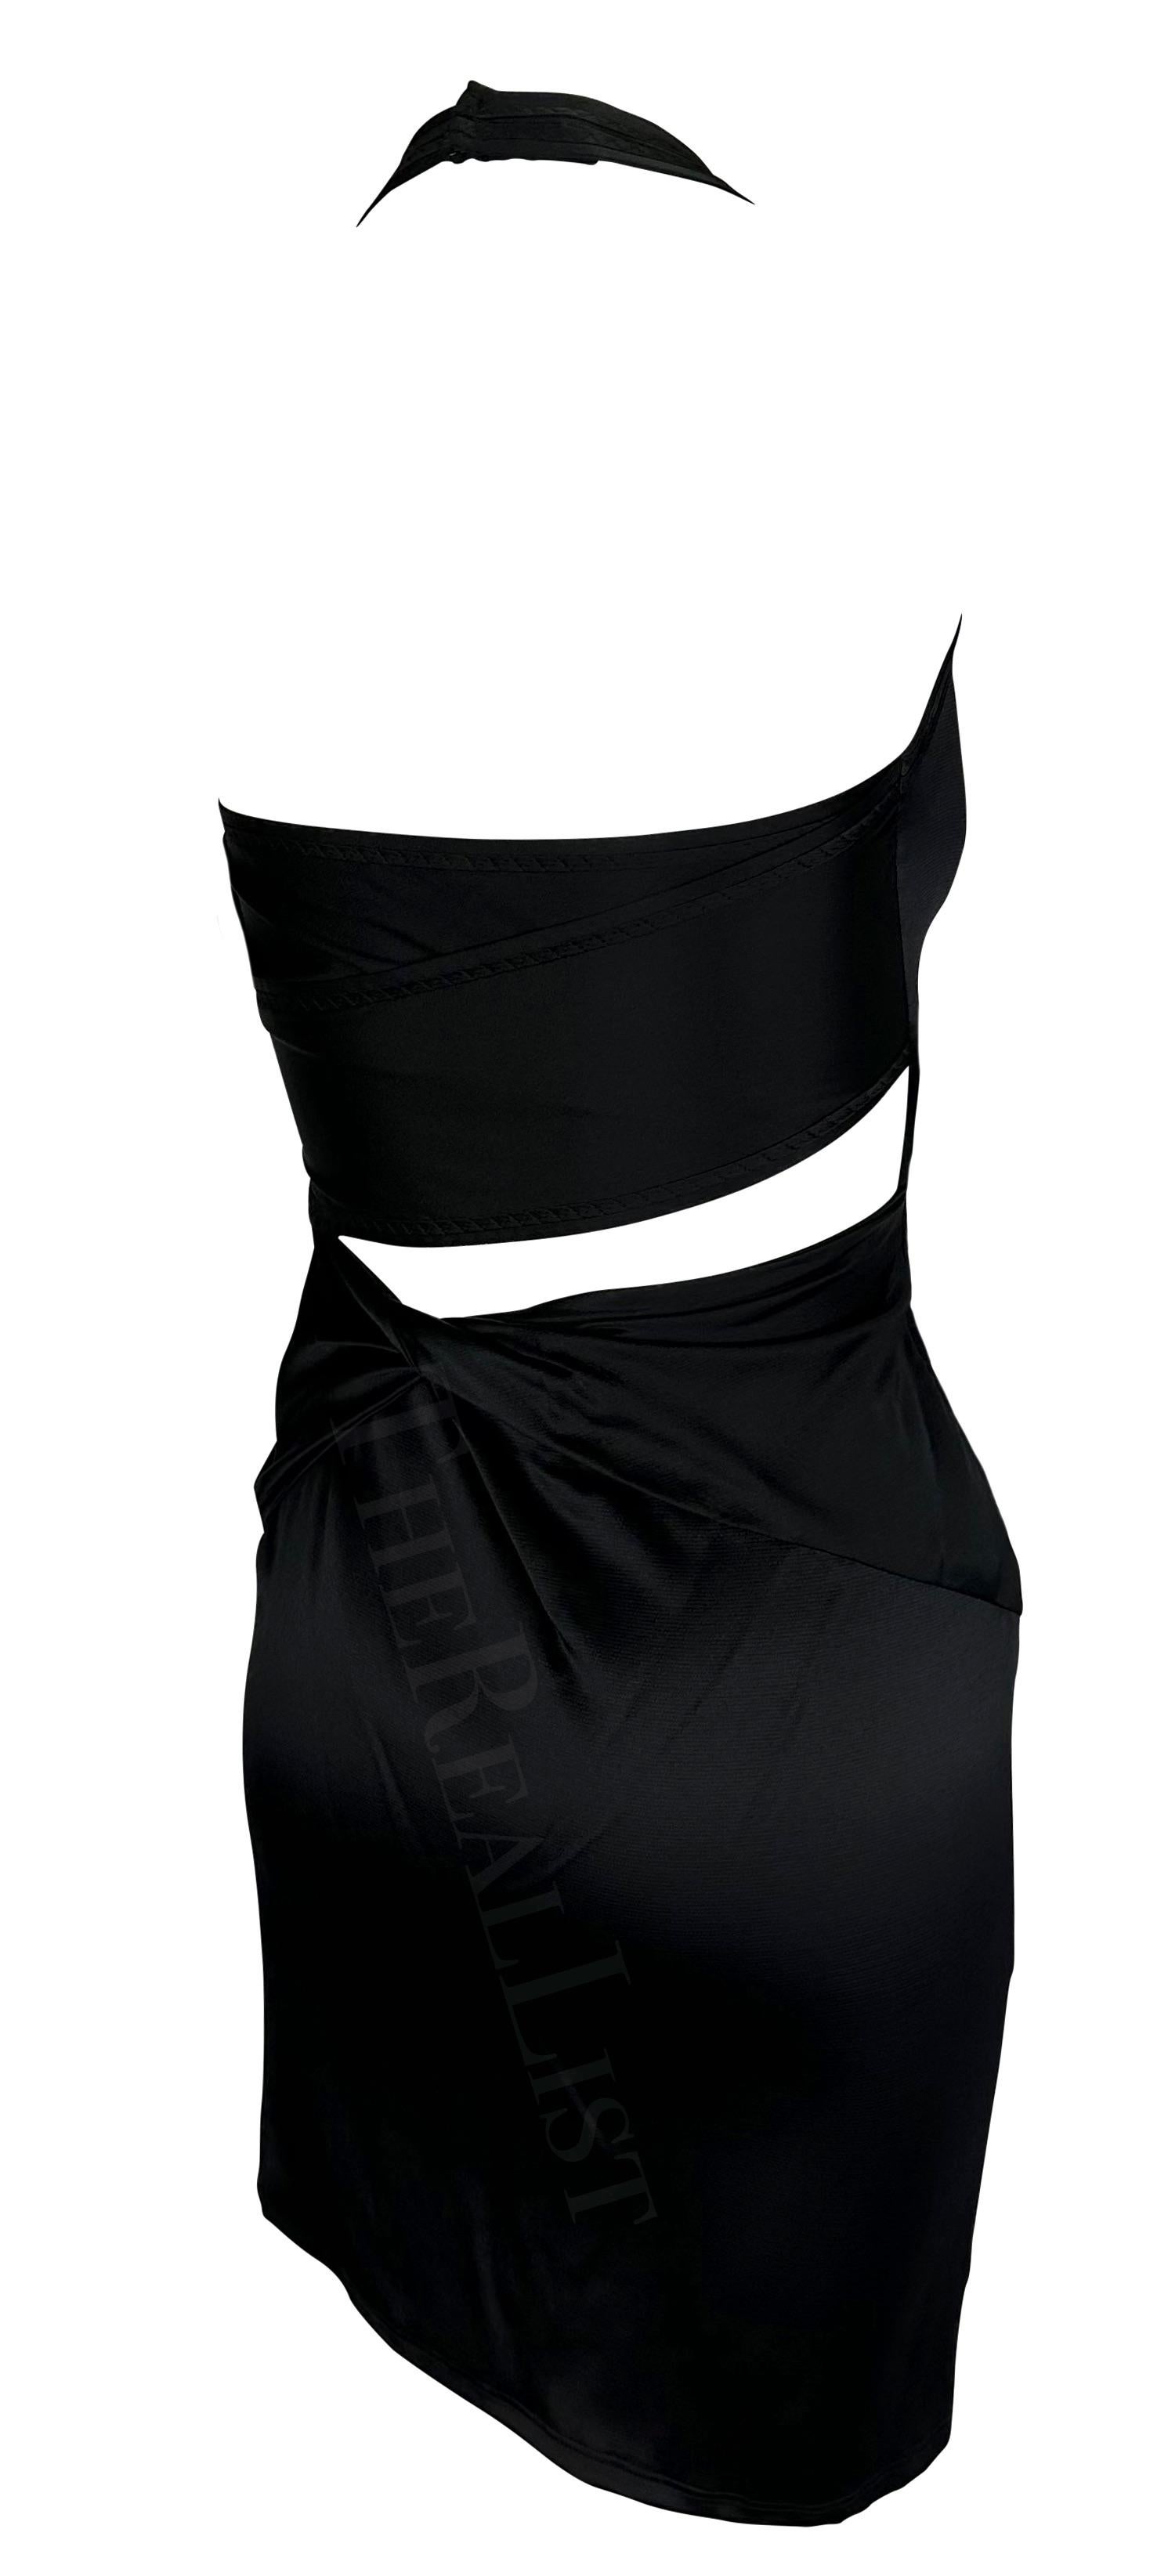 S/S 2005 Gucci Black Strap Cut Out Halter Neck Mini Dress In Excellent Condition For Sale In West Hollywood, CA